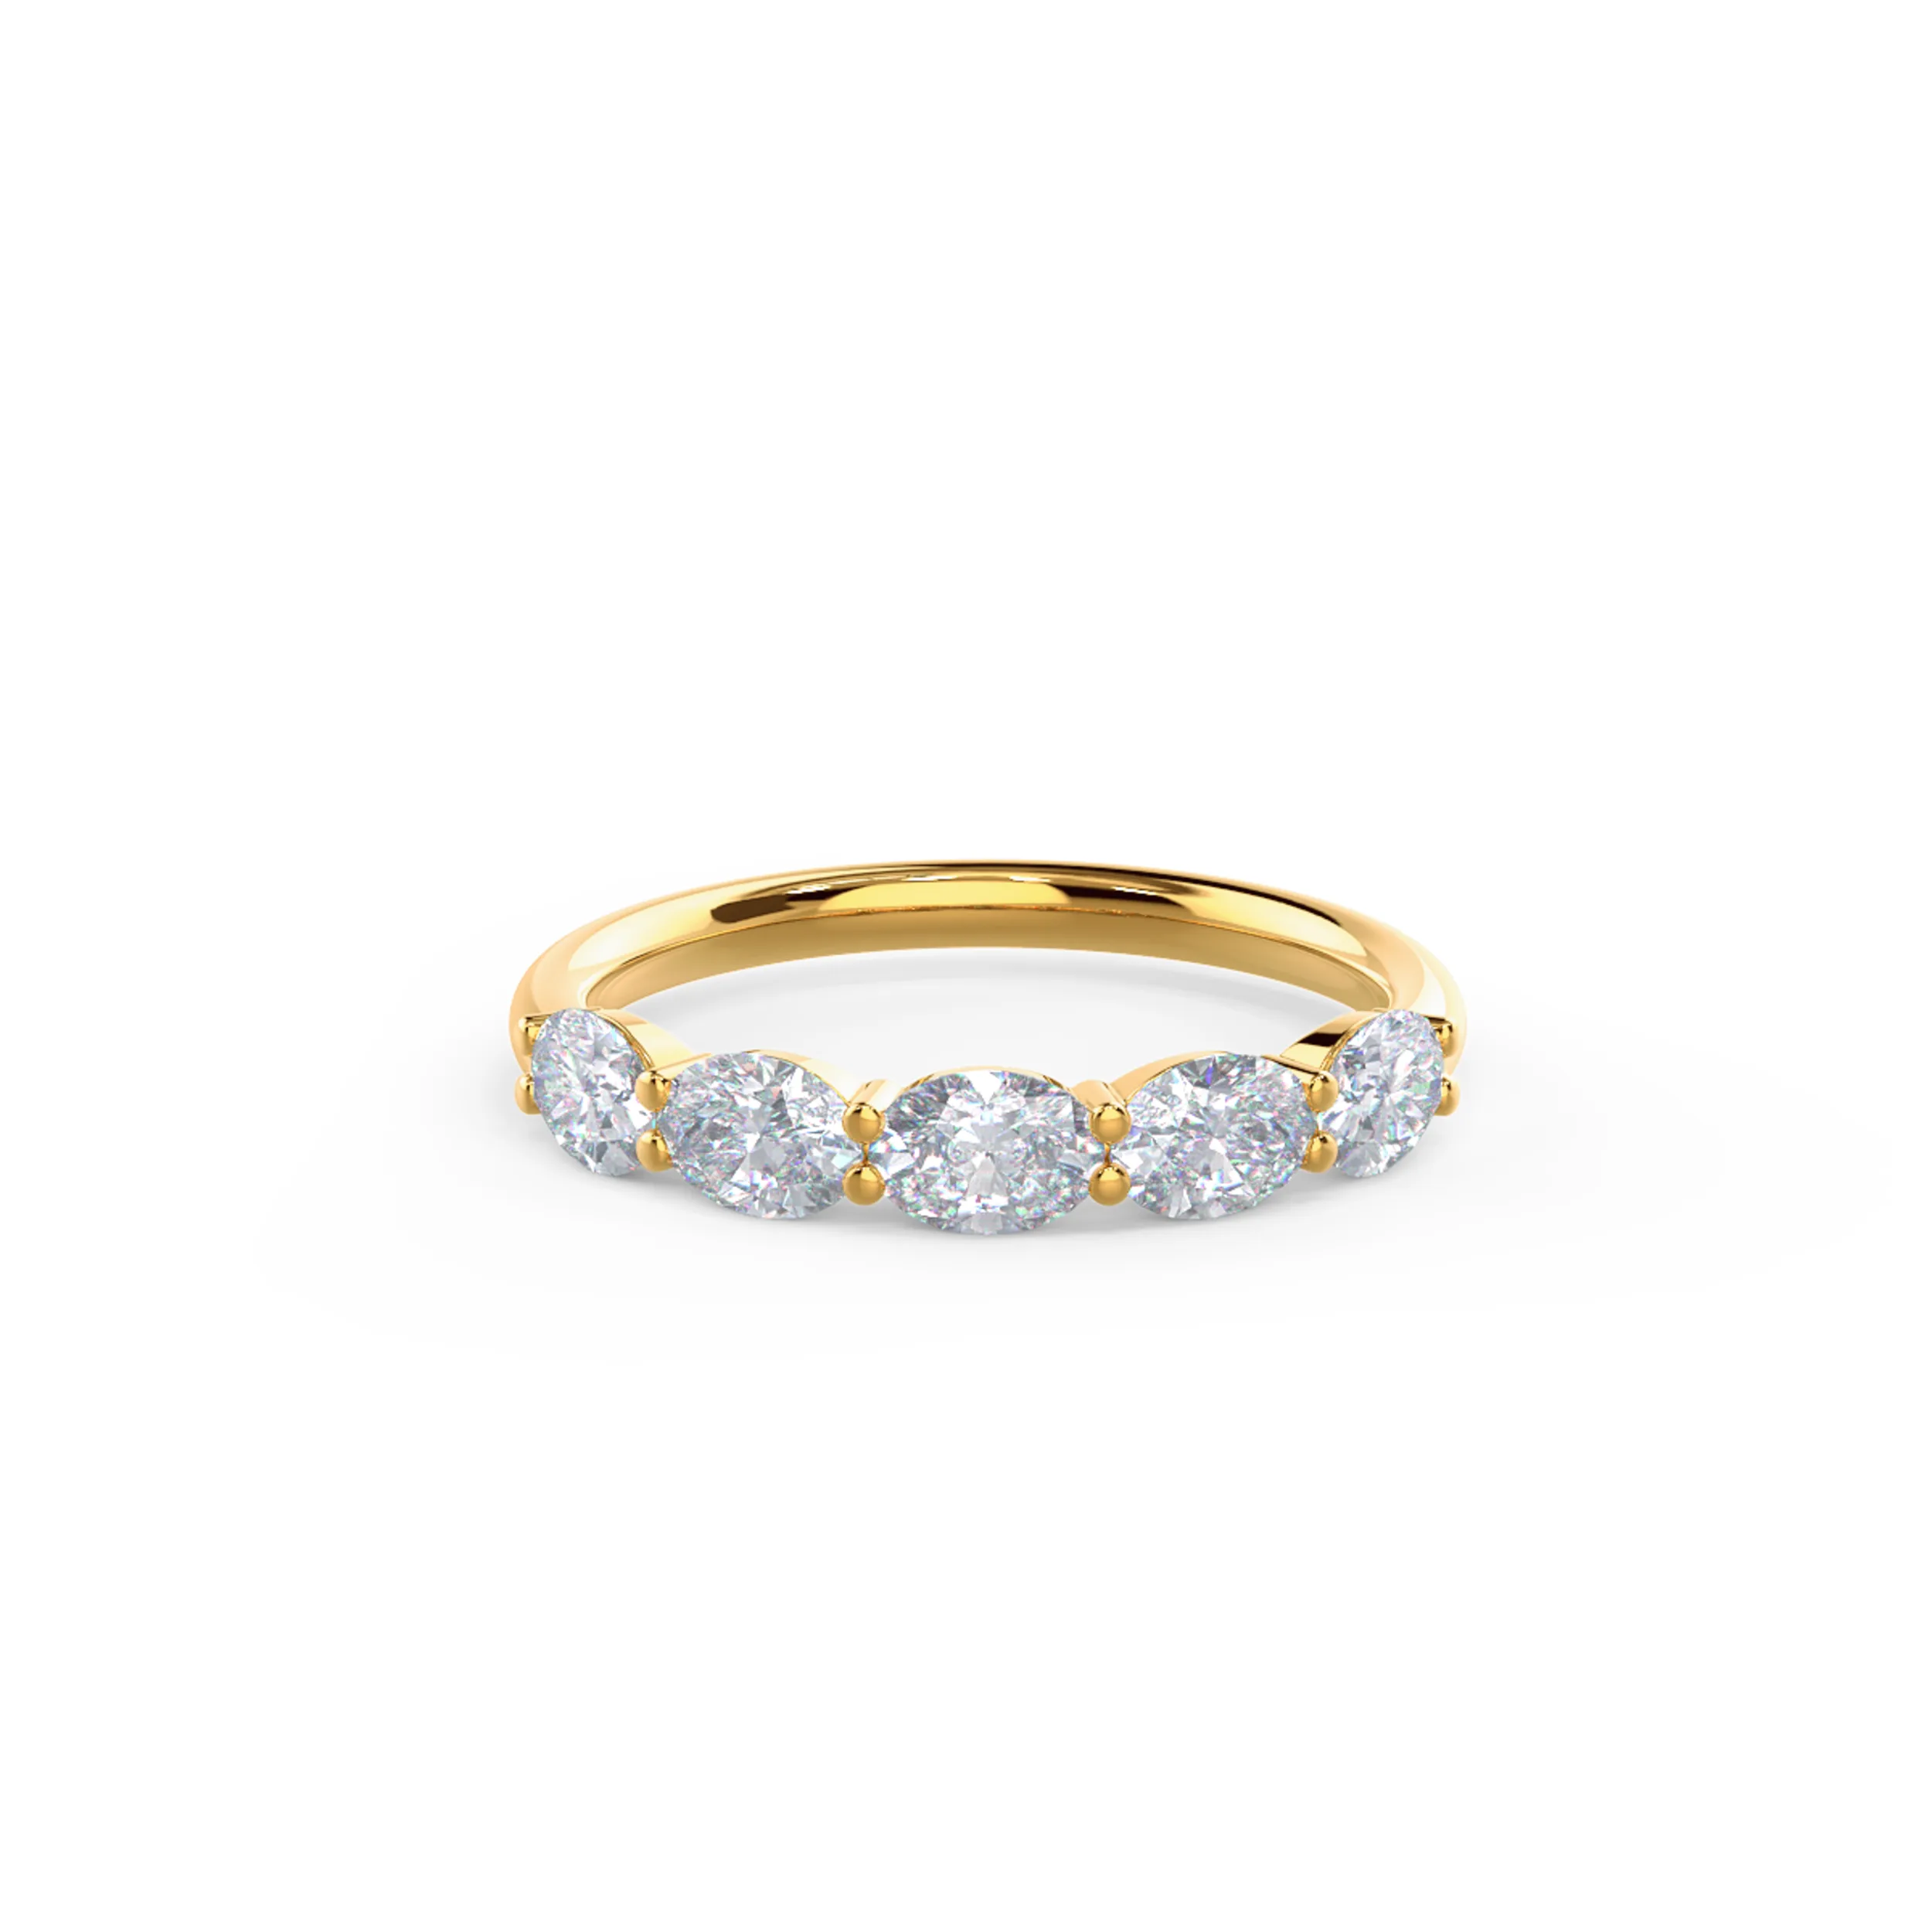 1.0 Carat Diamonds set in Yellow Gold Oval East-West Five Stone (Main View)